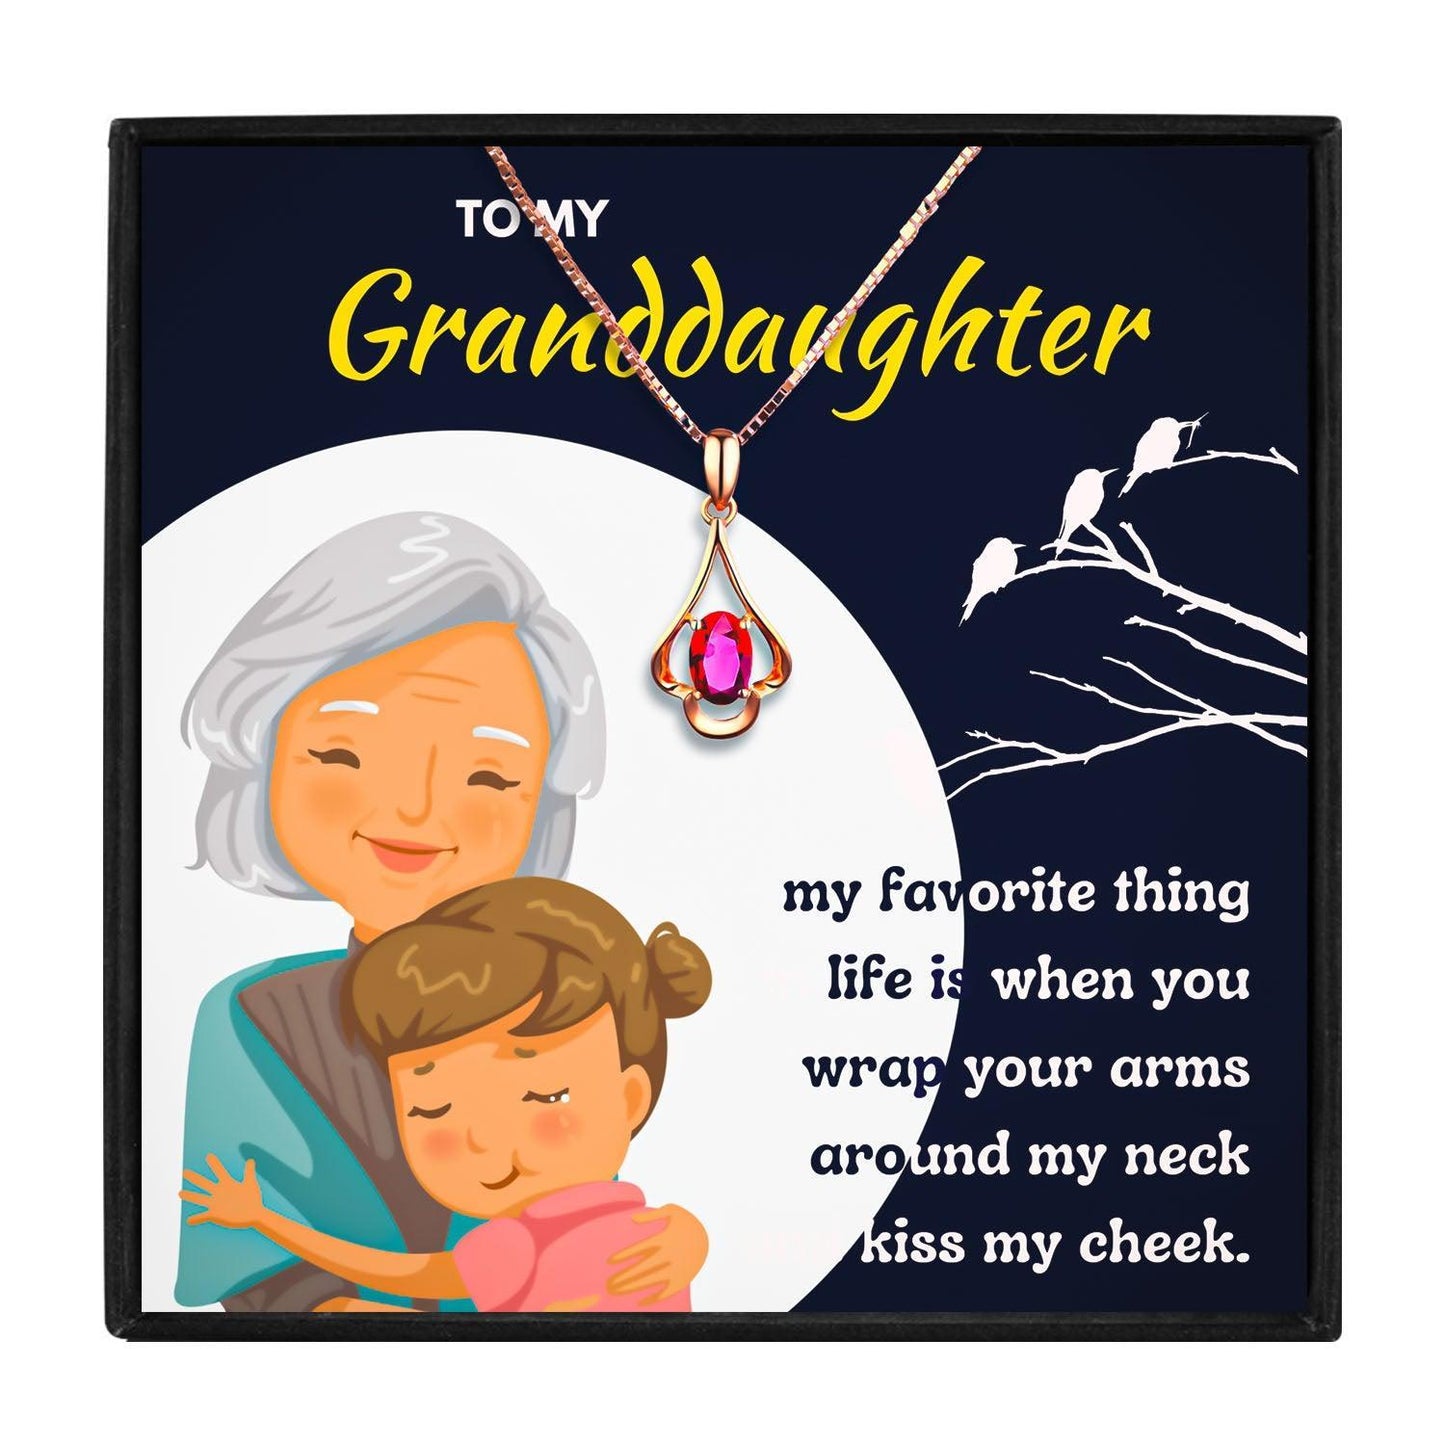 Granddaughter Necklace Gift Set From Grandma in 2023 | Granddaughter Necklace Gift Set From Grandma - undefined | granddaughter gift, granddaughter gifts from nana, Granddaughter Necklace, great granddaughter gifts, jewelry for granddaughter from grandmother | From Hunny Life | hunnylife.com